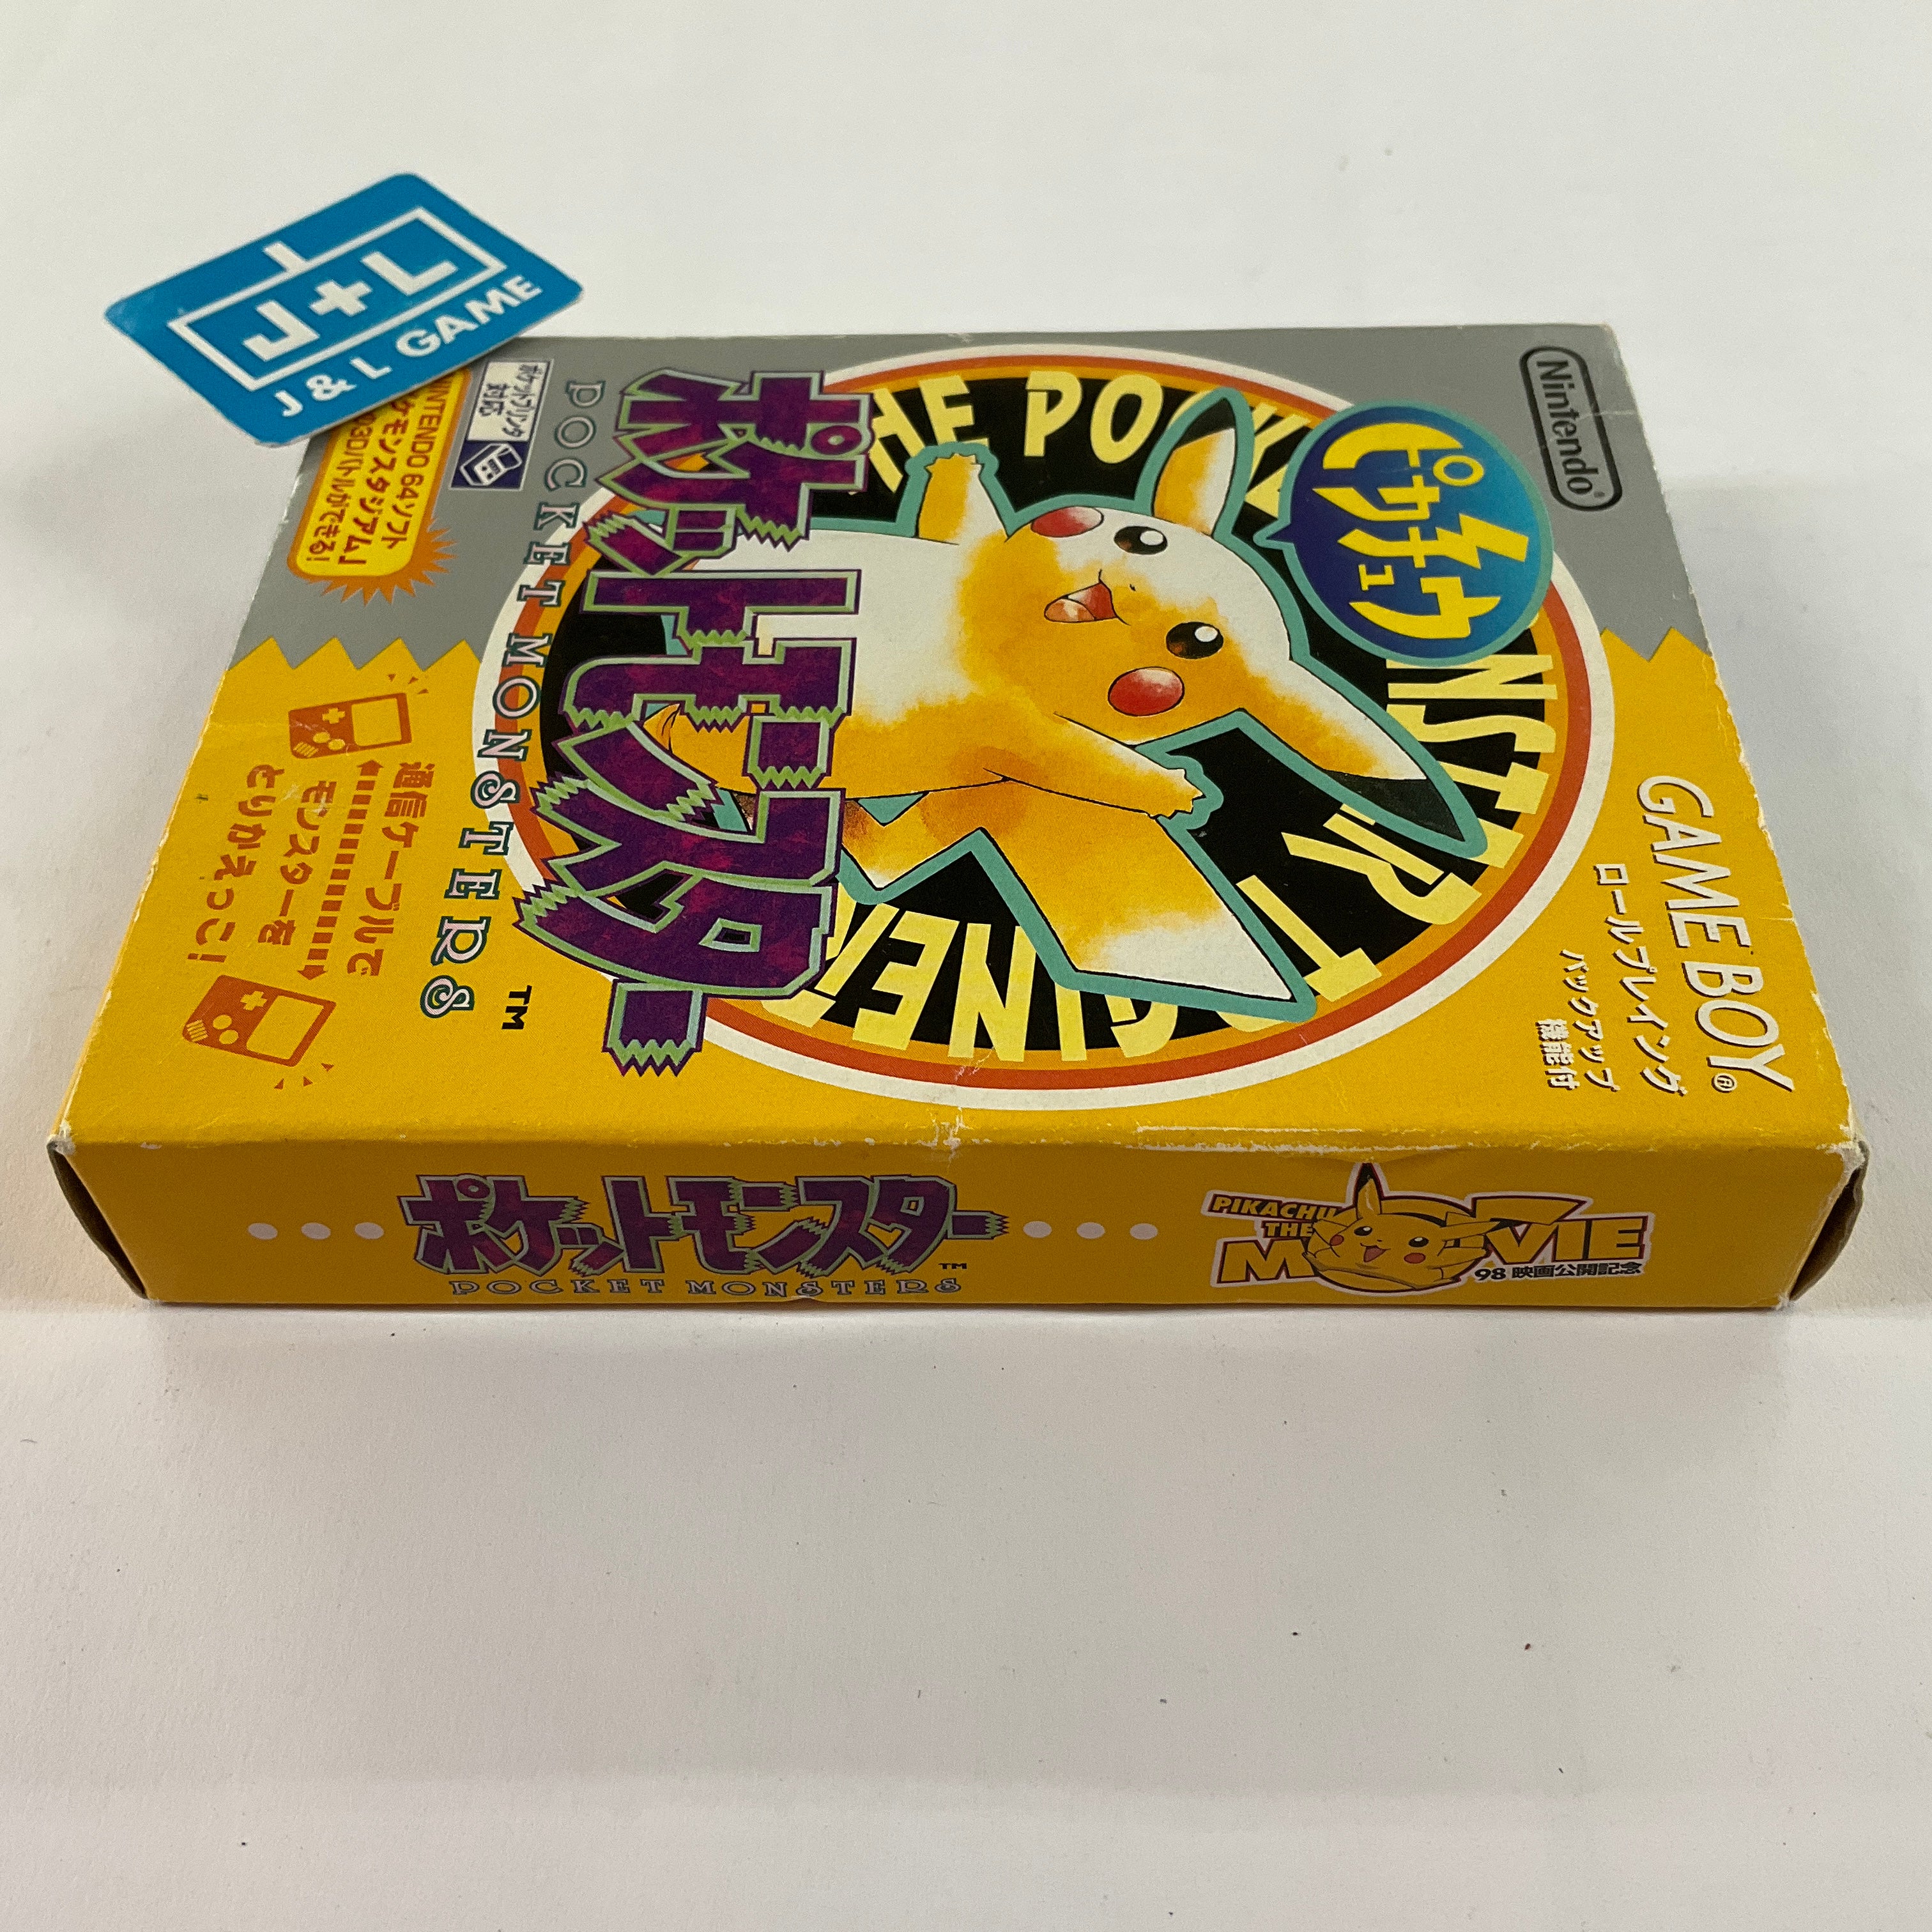 Pocket Monsters Yellow - (GB) Game Boy [Pre-Owned] (Japanese Import) Video Games Nintendo   